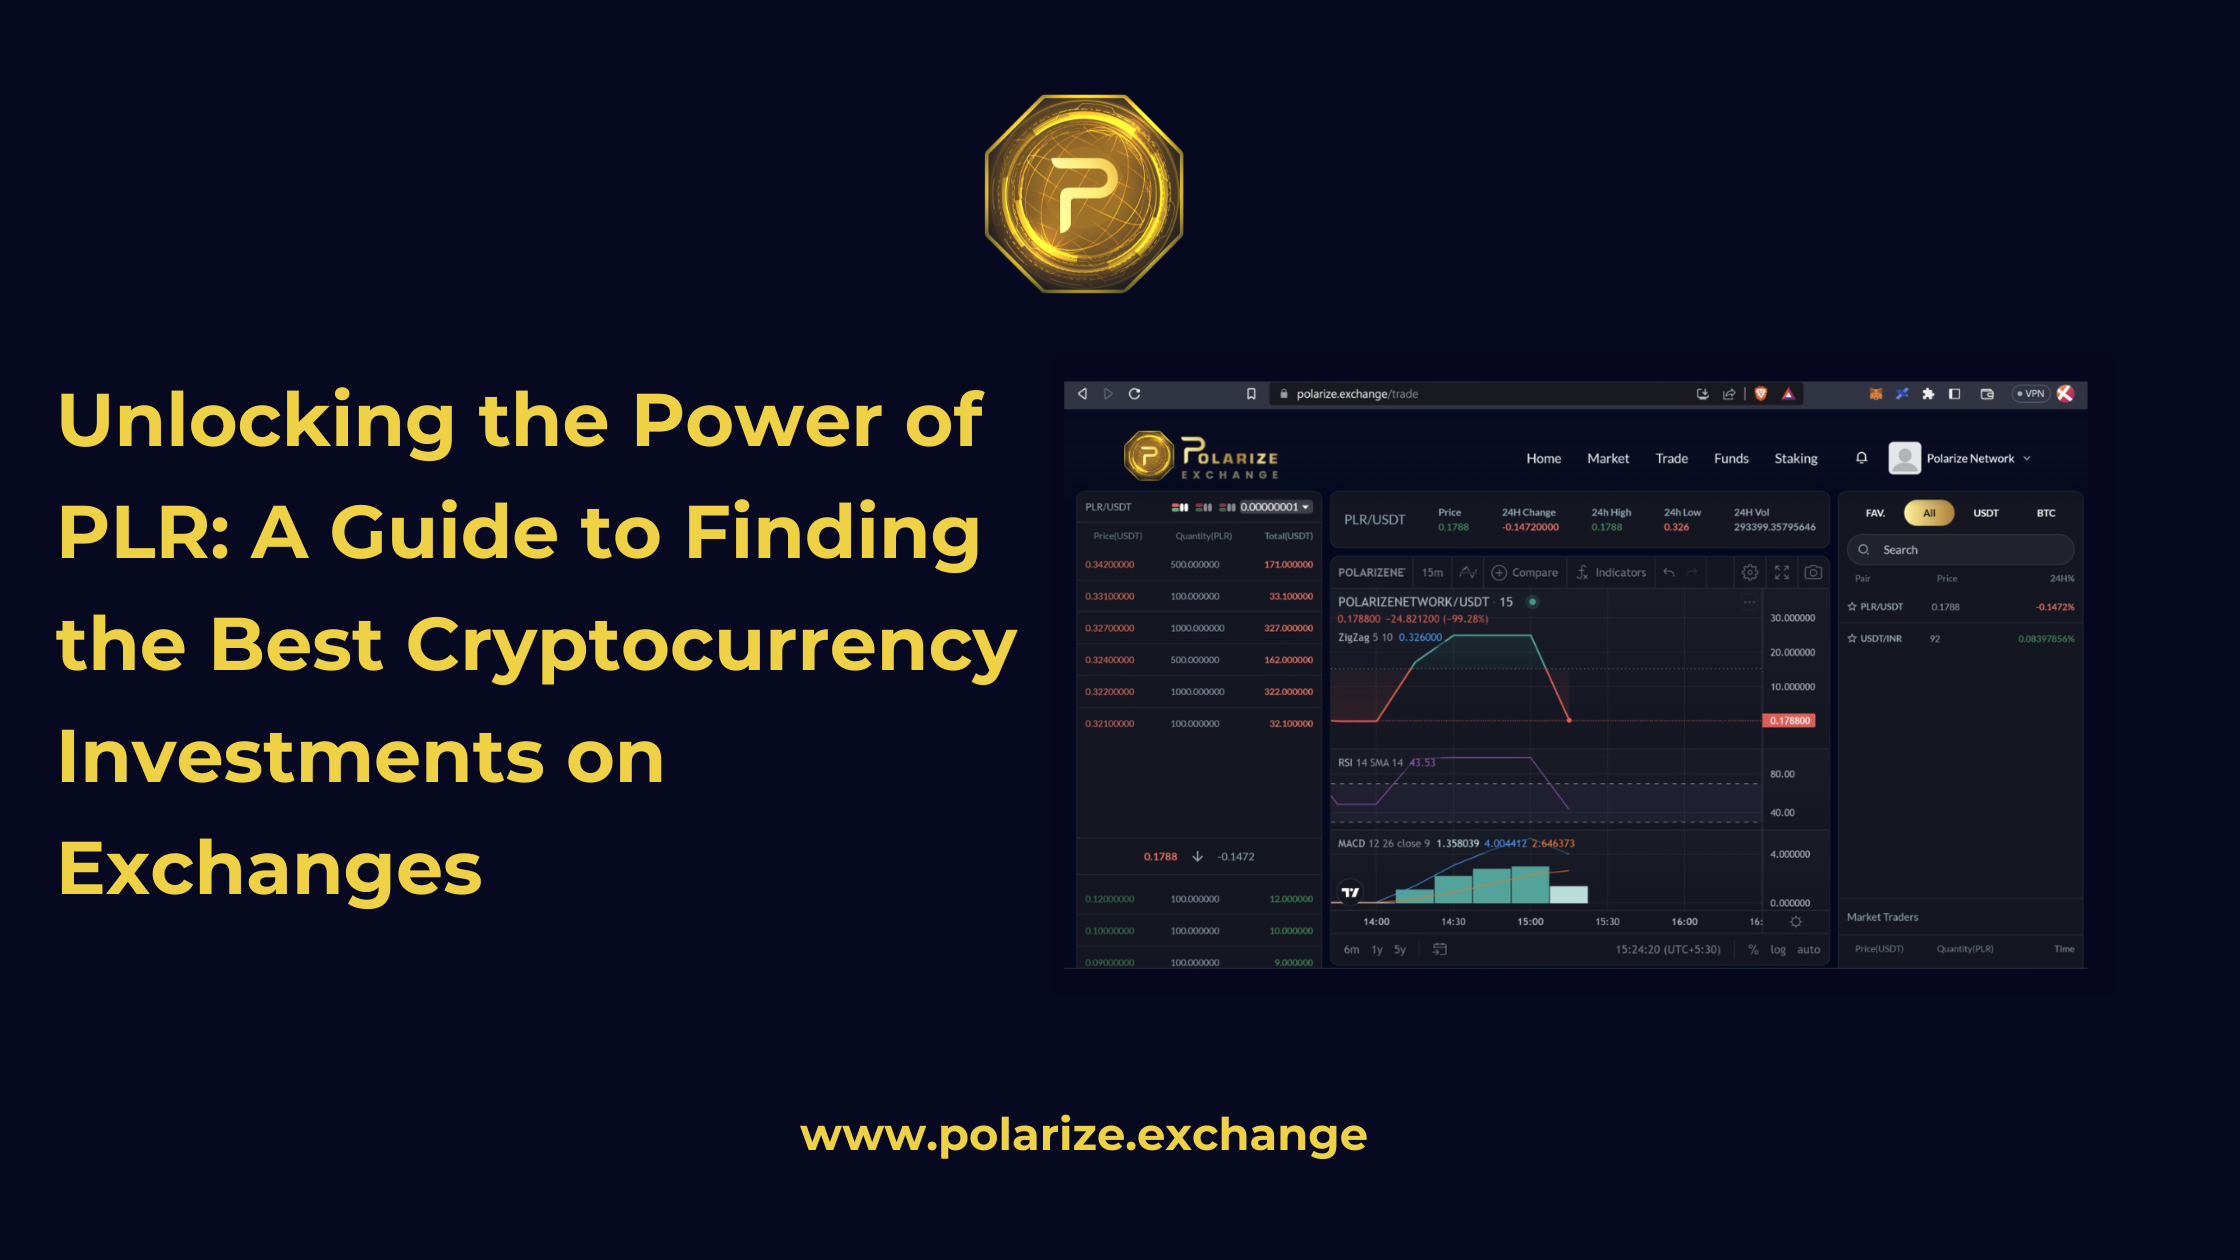 Unlocking the Power of PLR A Guide to Finding the Best Cryptocurrency Investments on Exchanges